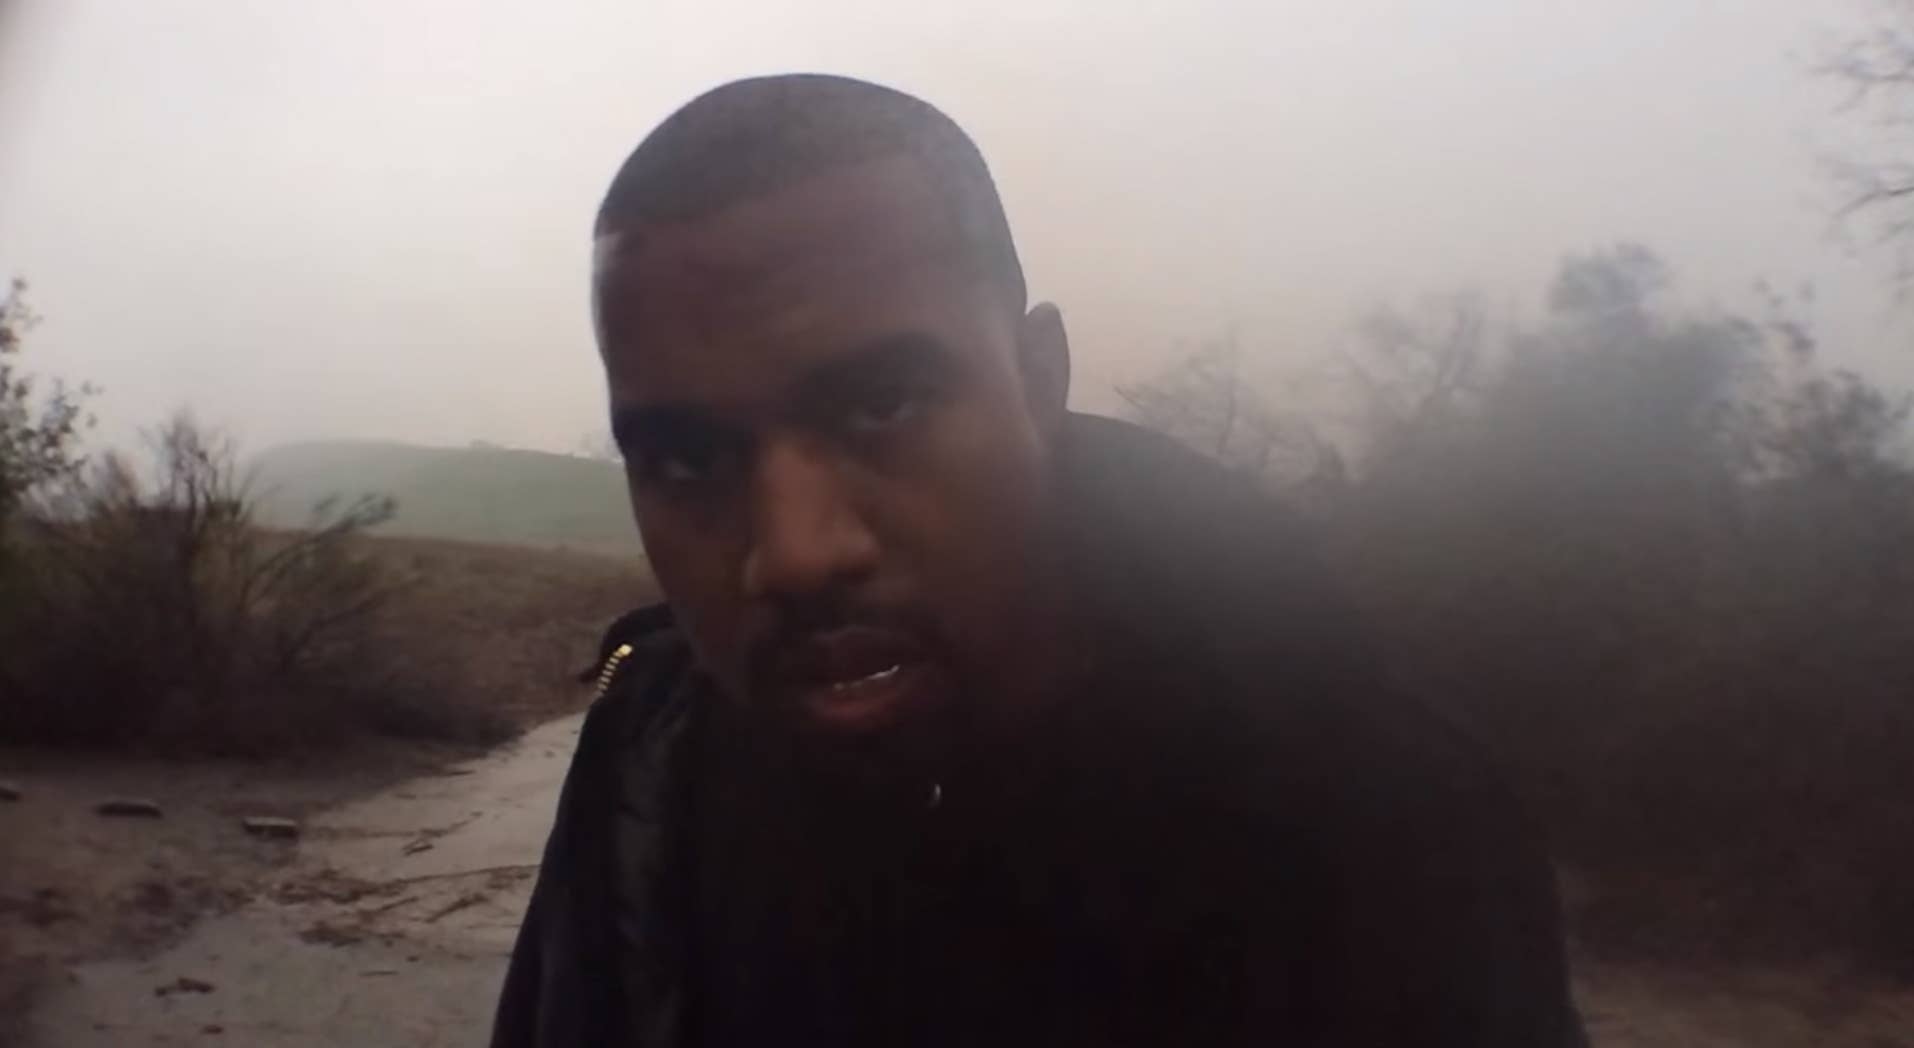 Kanye West's "Only One" video.